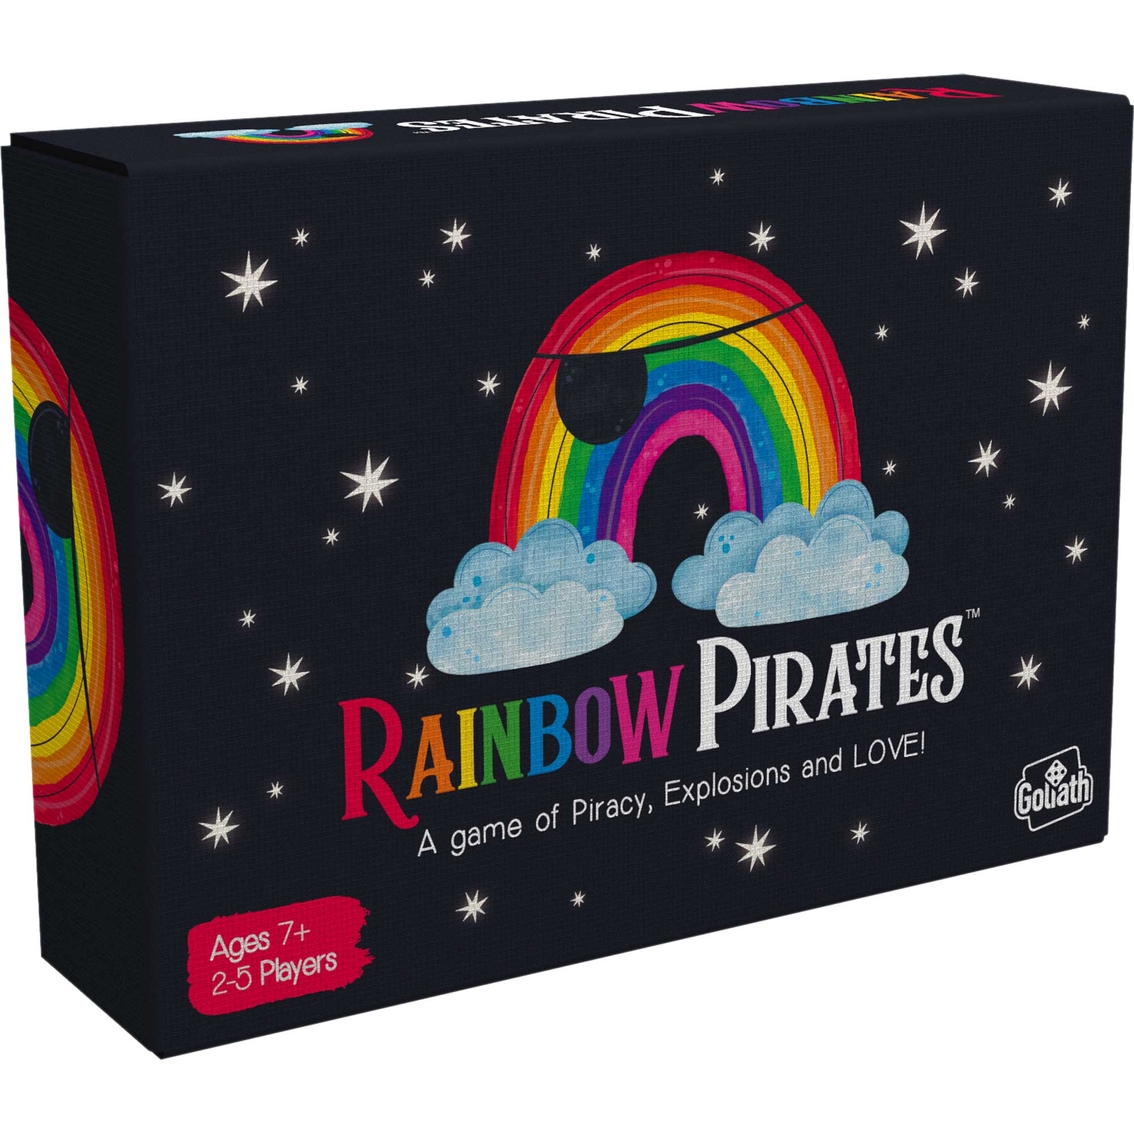 Goliath Games Rainbow Pirates Card Game - Image 3 of 3